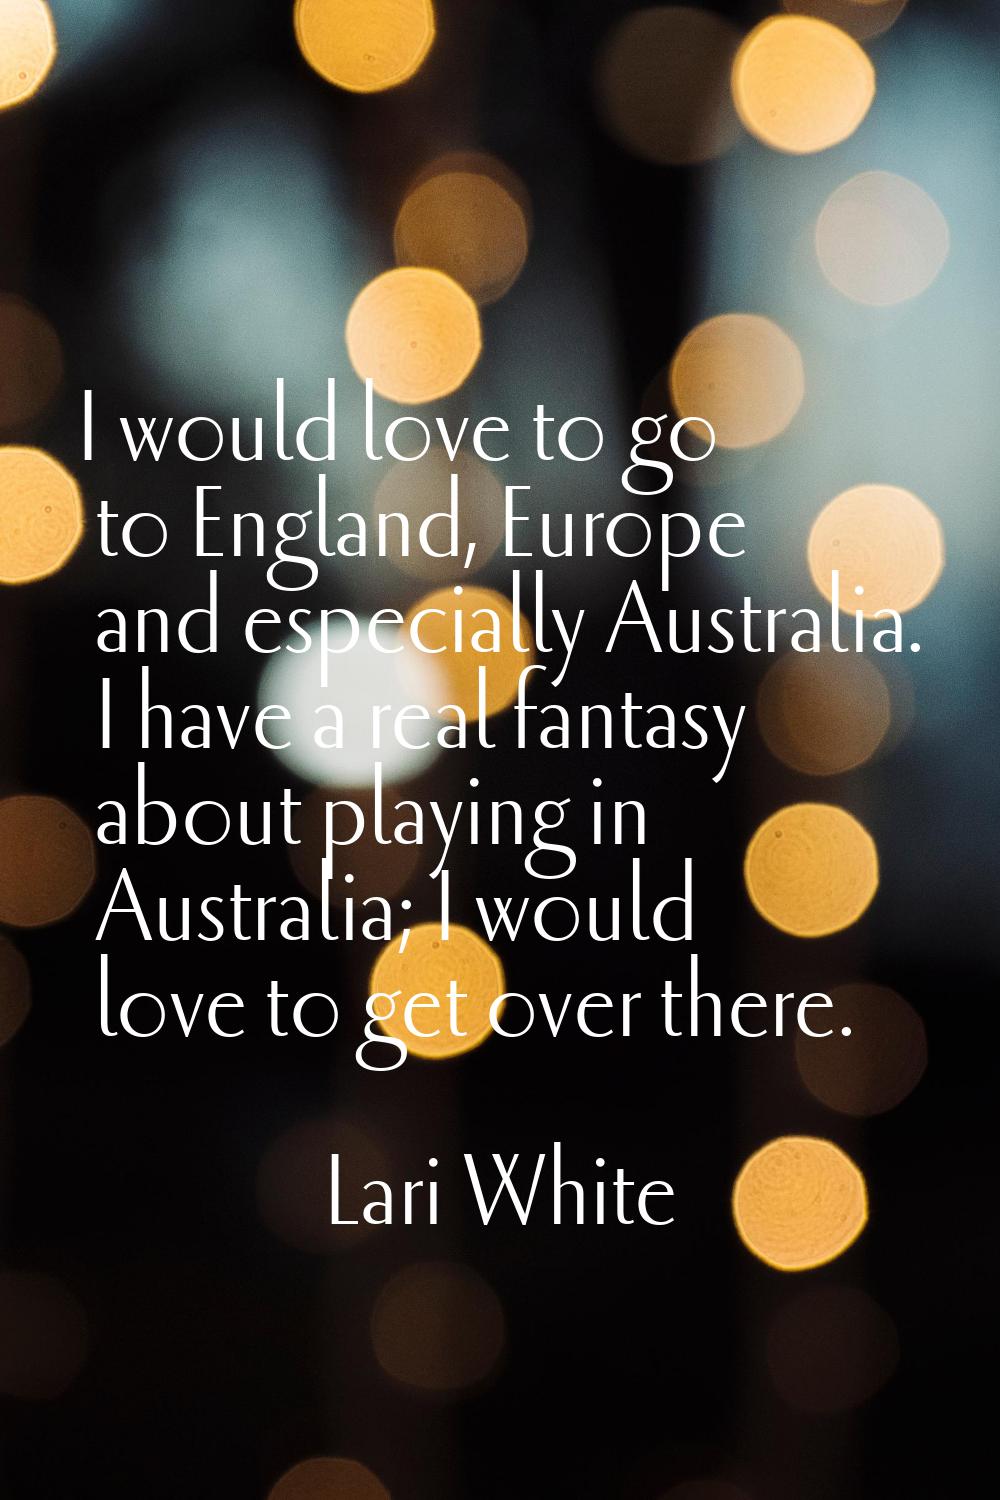 I would love to go to England, Europe and especially Australia. I have a real fantasy about playing